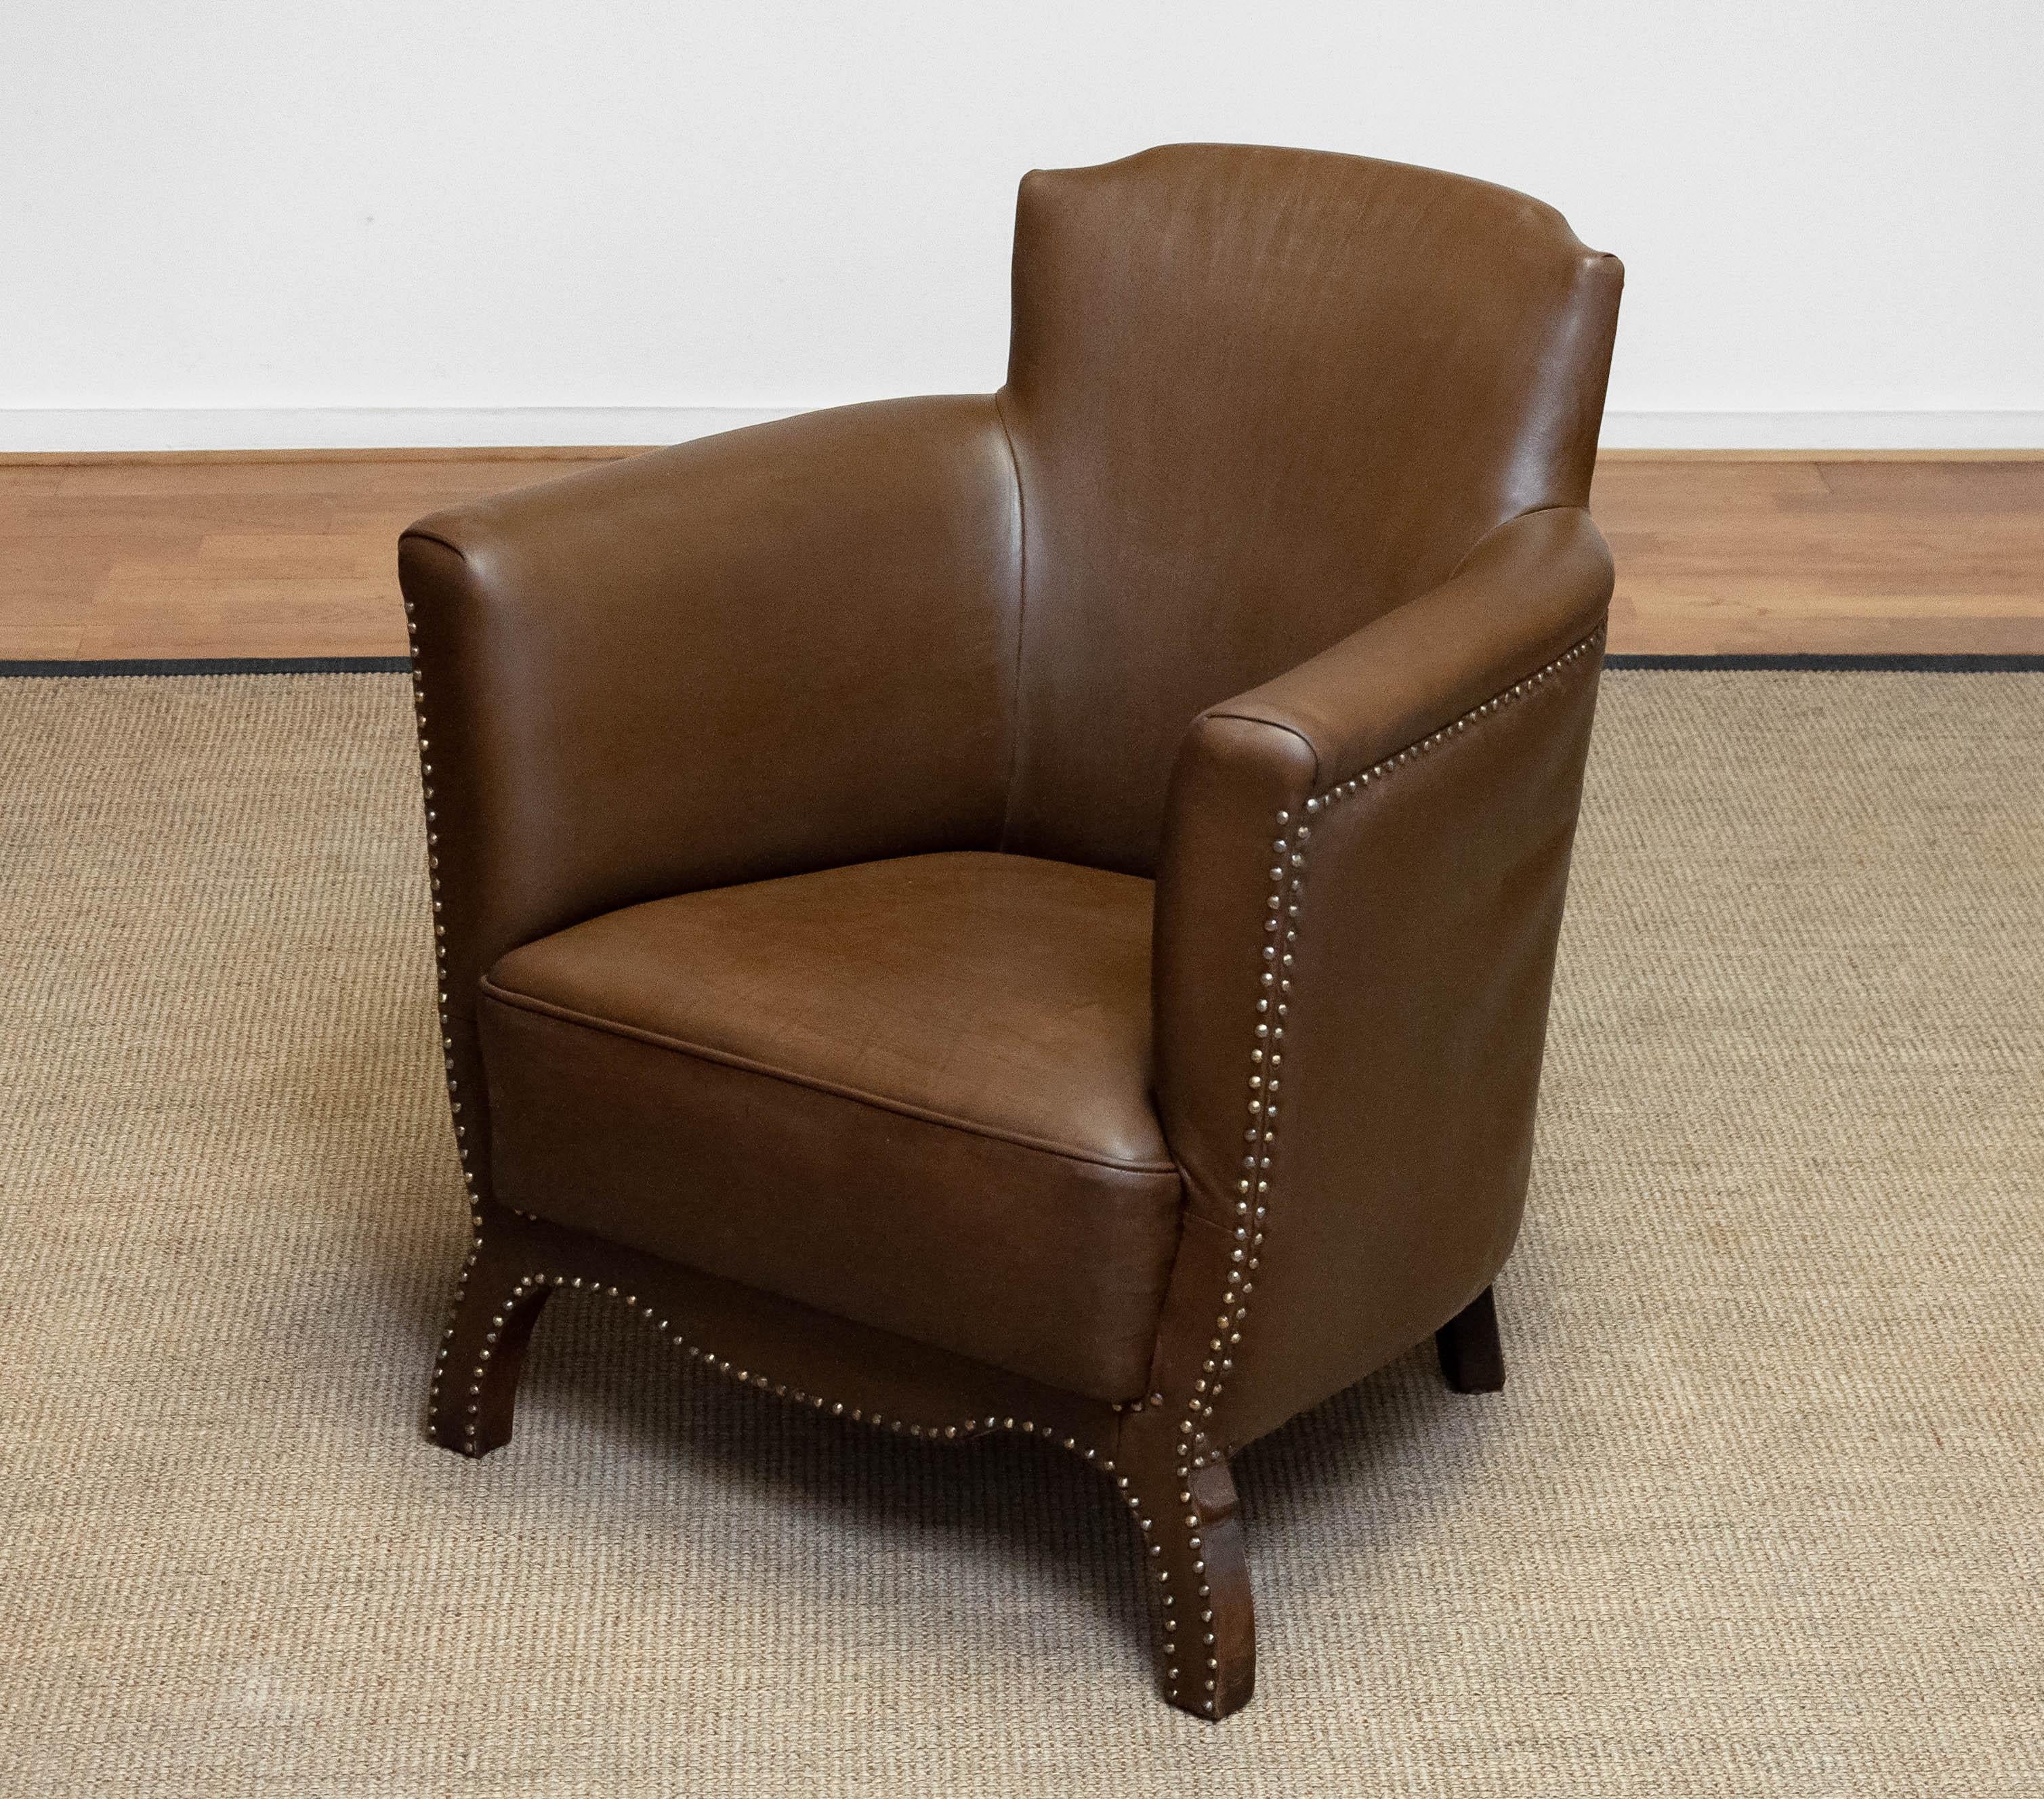 Gustavian 1930s Swedish Tan / Brown Nailed Leather Lounge Chair By Otto Schultz For Boet For Sale